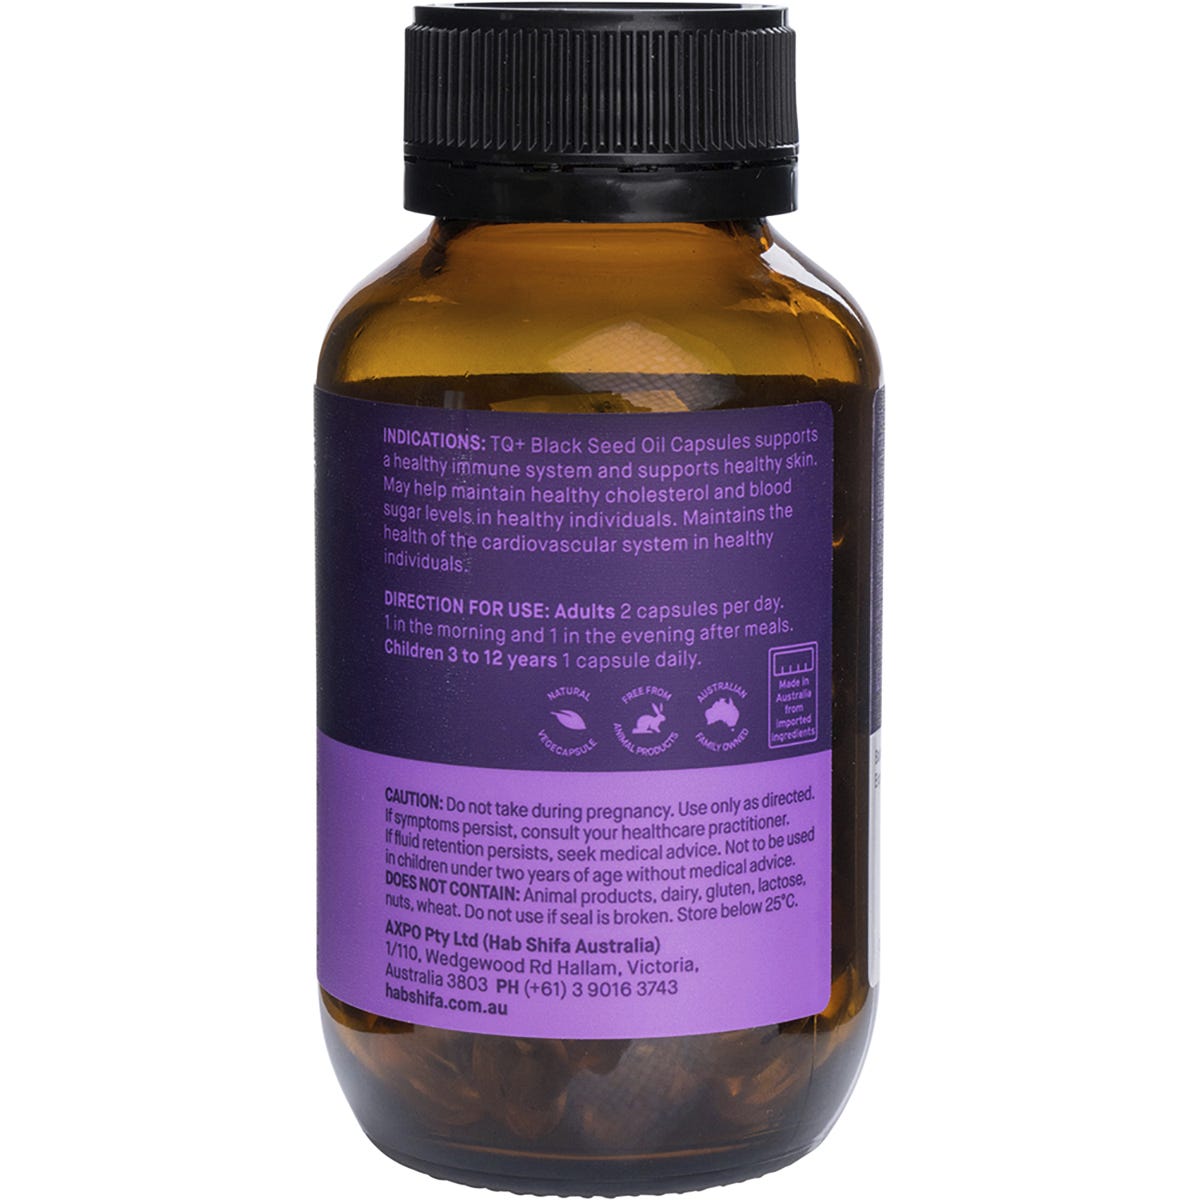 Hab Shifa TQ+ Activated Black Seed Oil Vegecapsules 120 Caps - Dr Earth - Immune Support